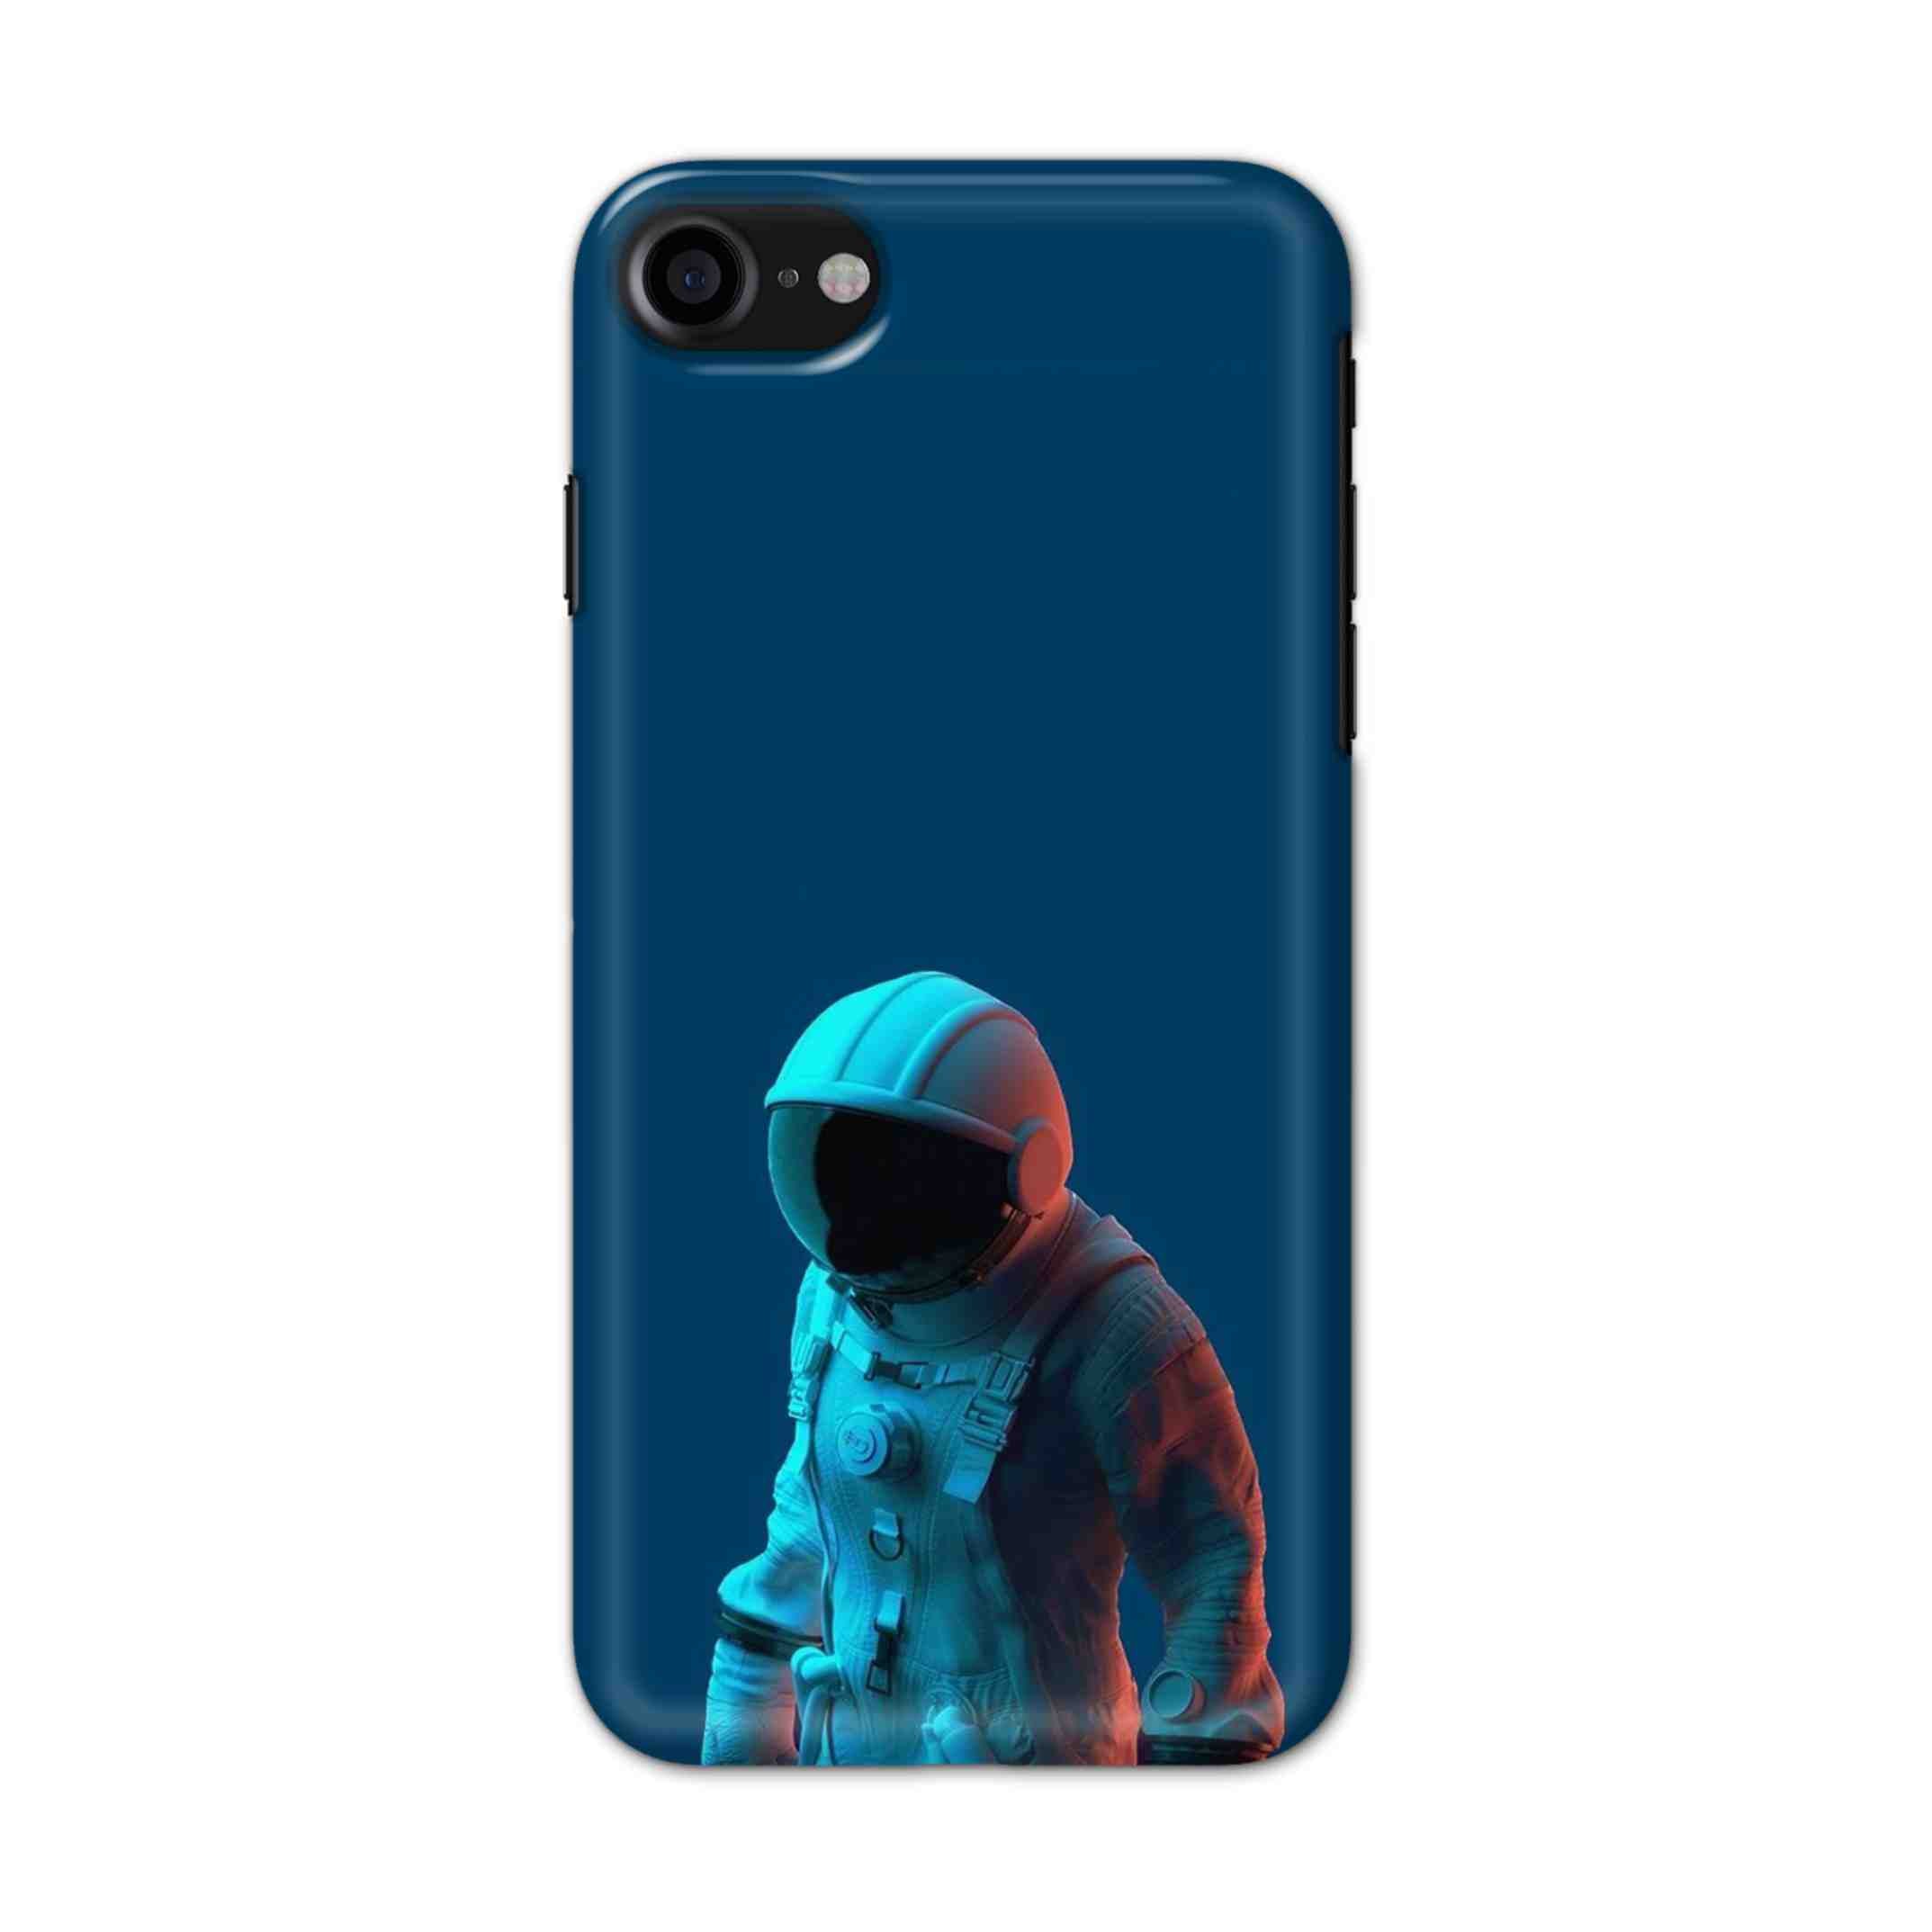 Buy Blue Astranaut Hard Back Mobile Phone Case/Cover For iPhone 7 / 8 Online